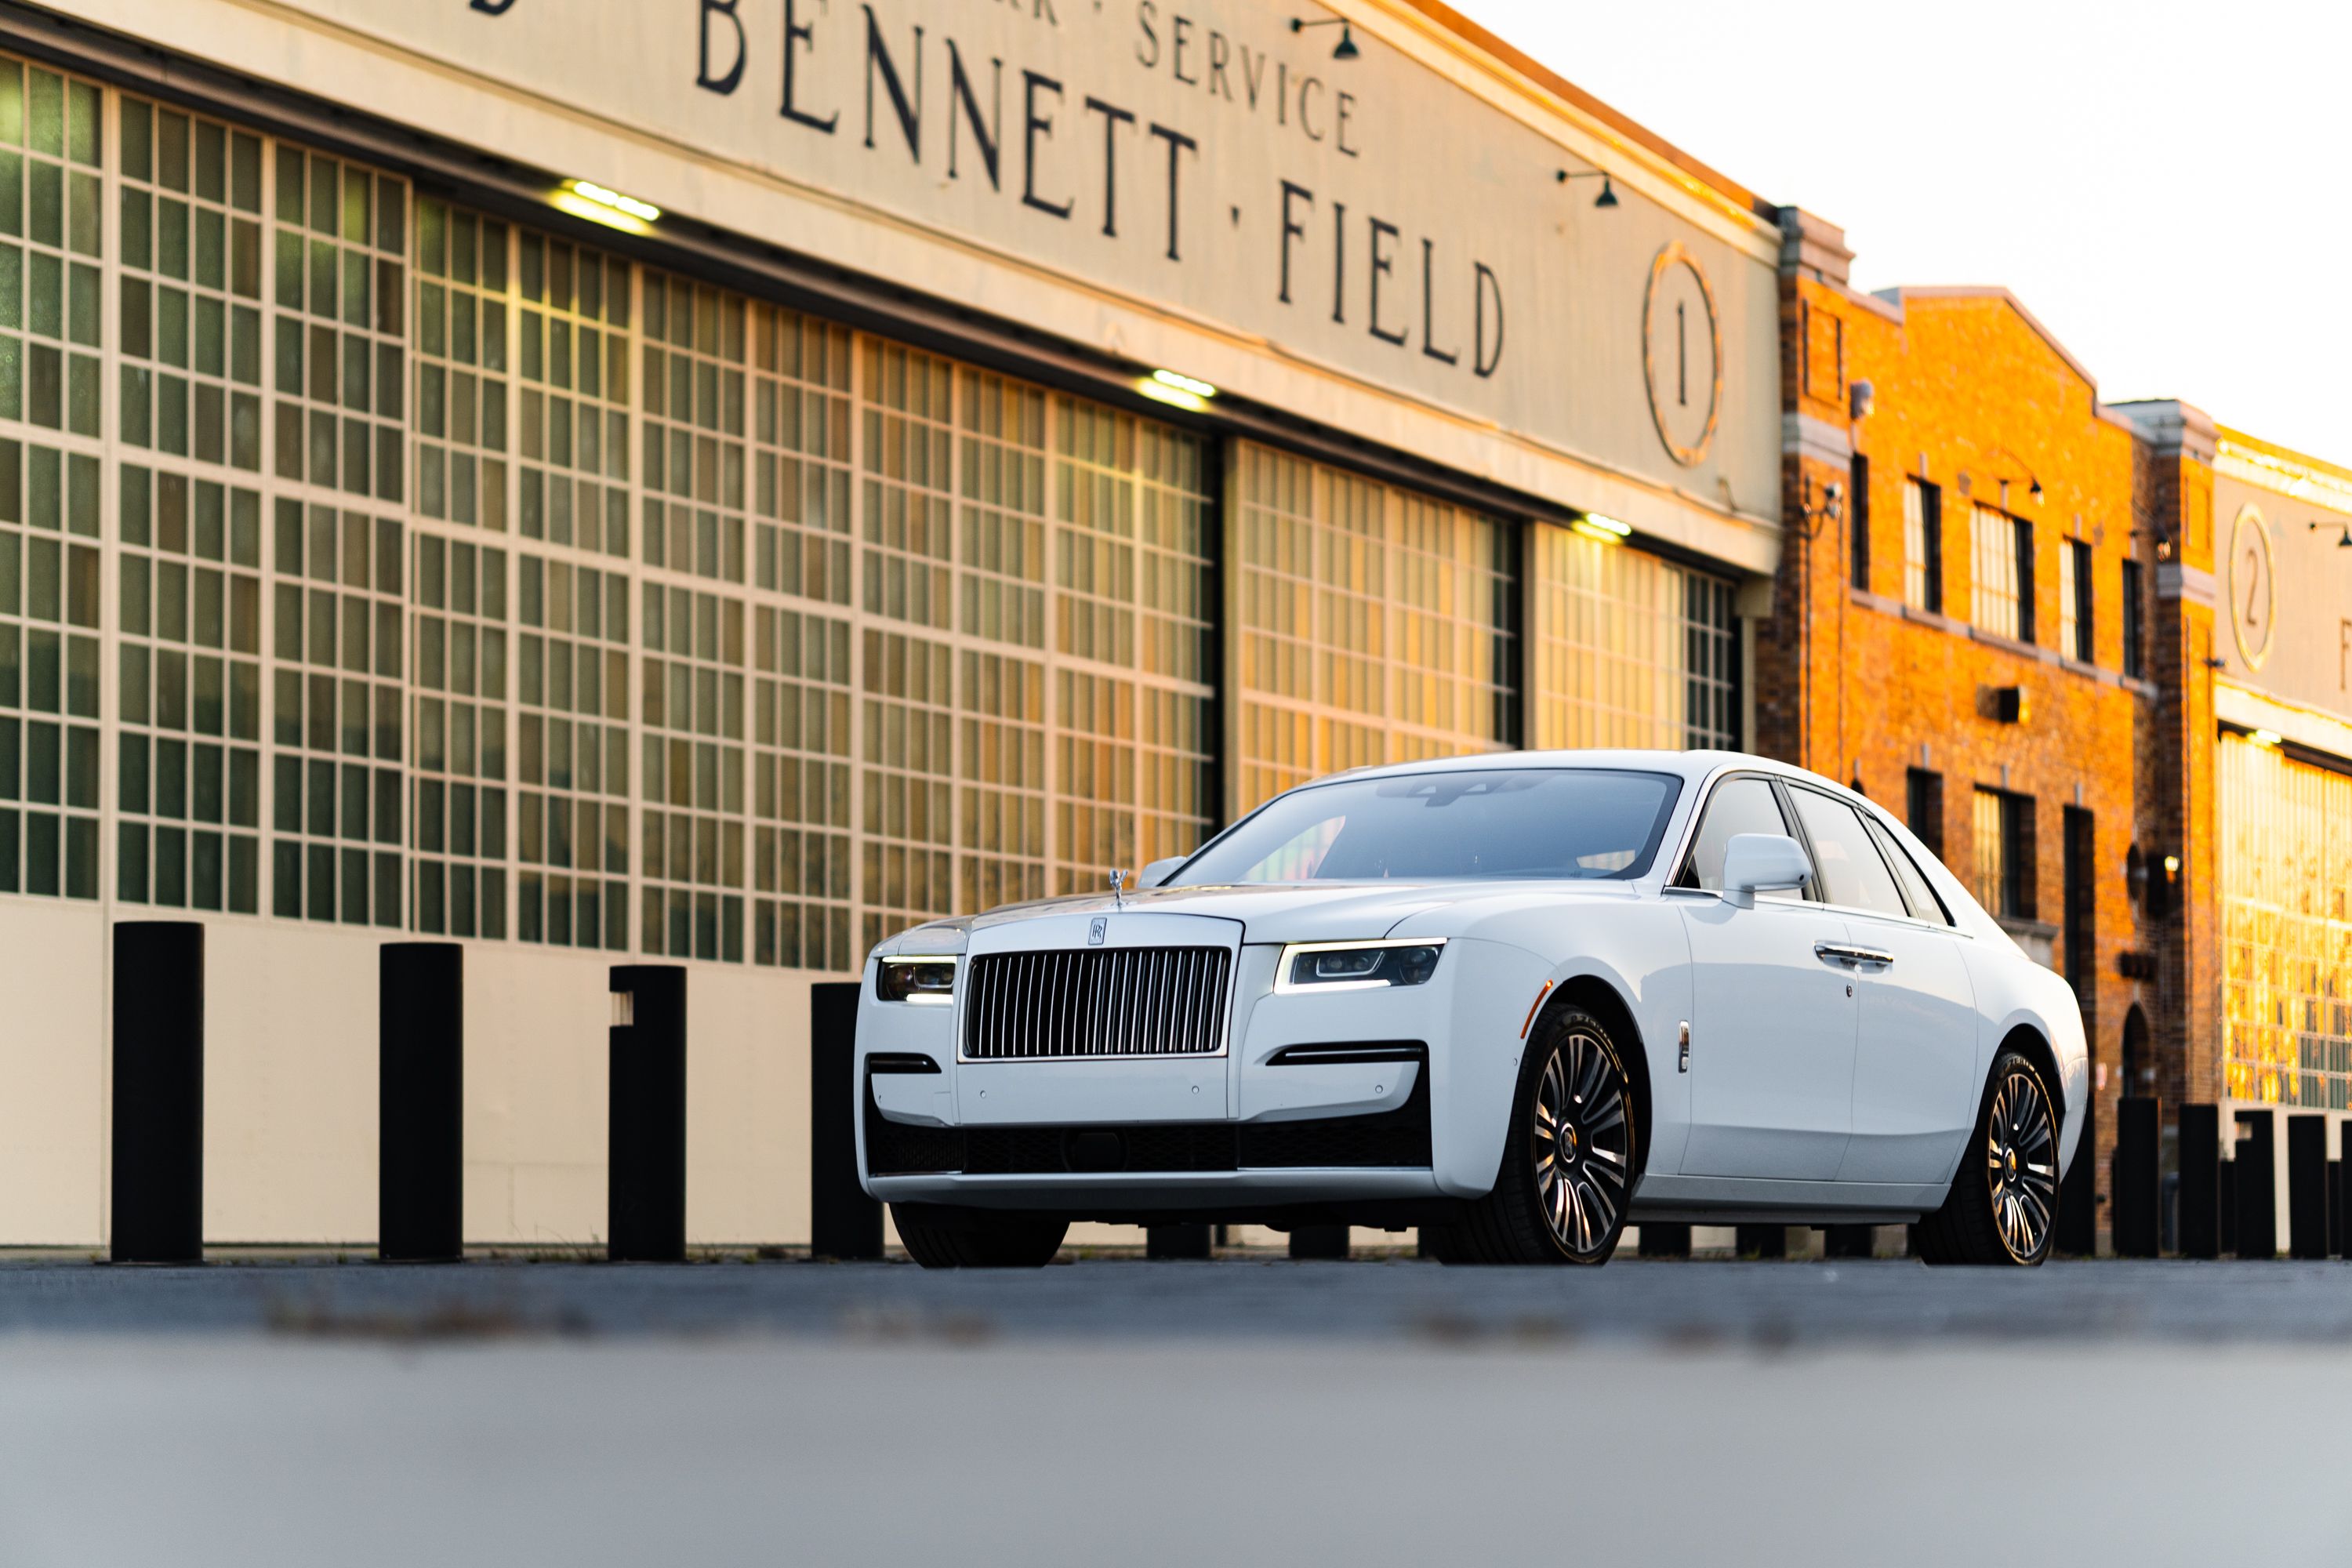 This is how the Roadshow staff would spec the 2021 RollsRoyce Ghost  CNET